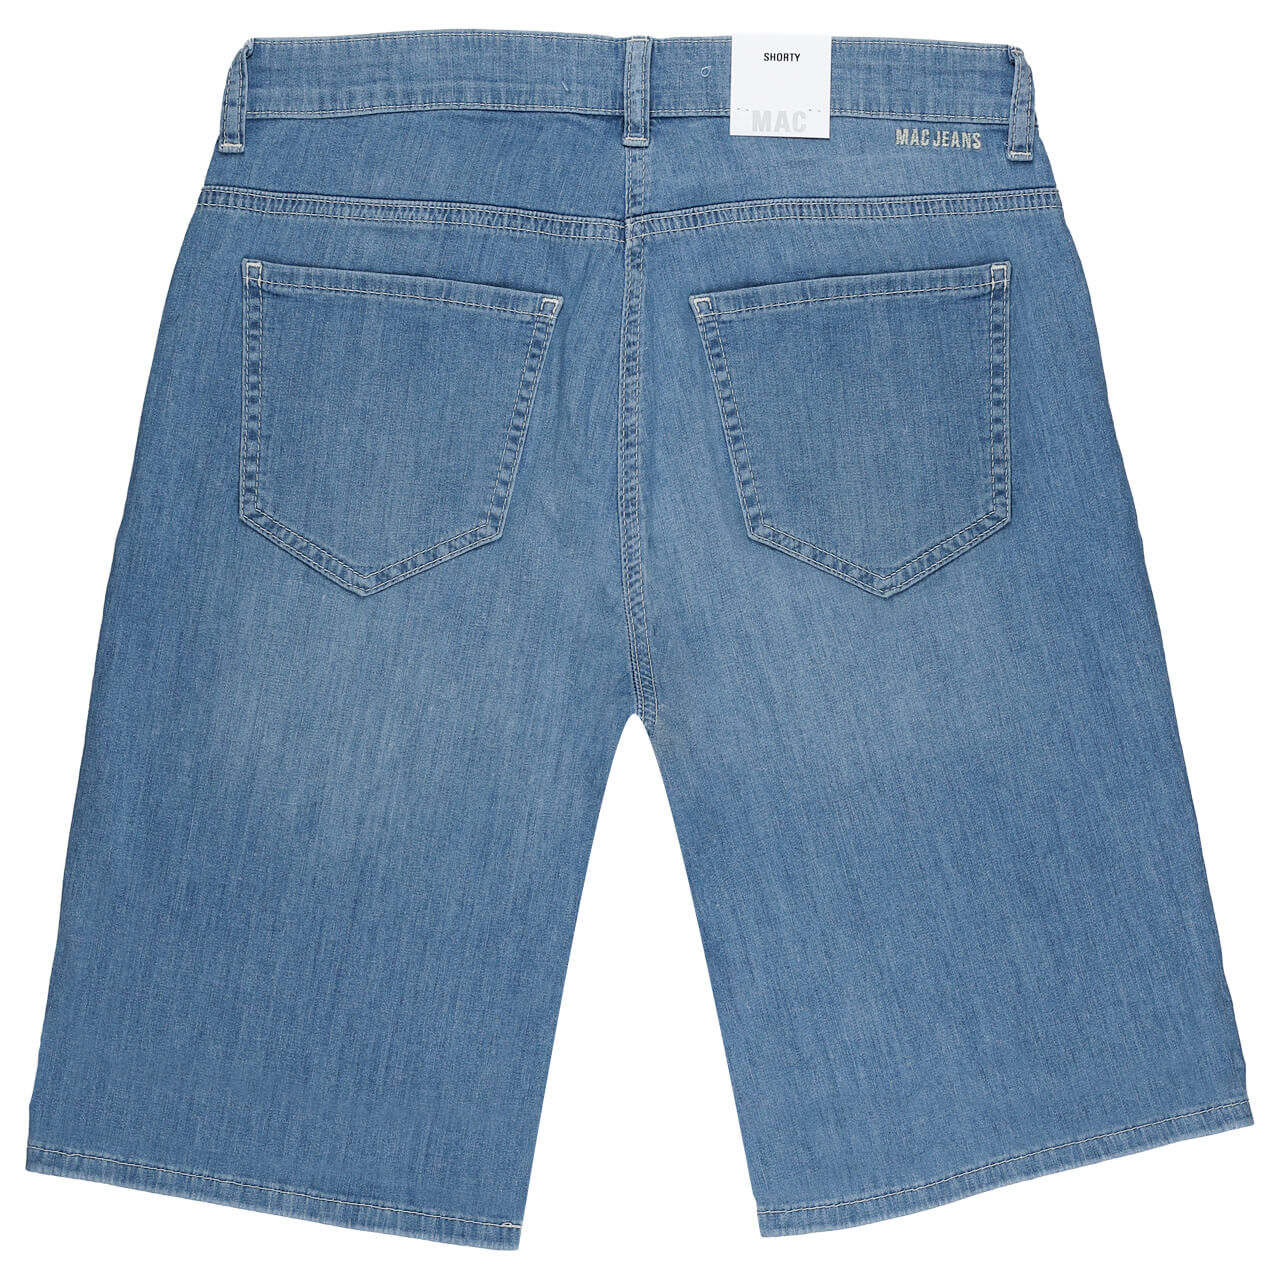 MAC Shorty Jeans mid blue soft washed summer clean